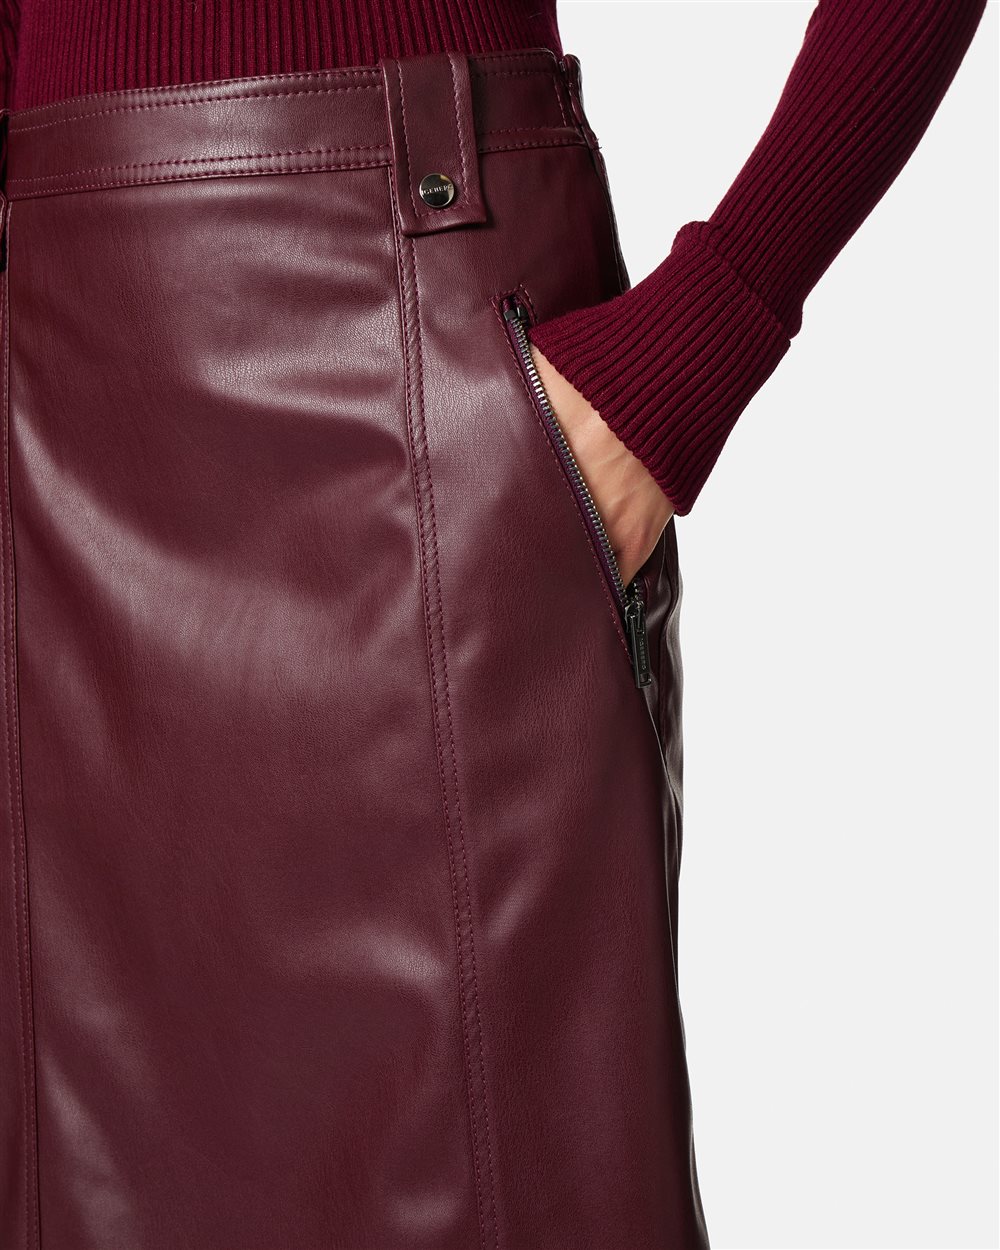 Eco-leather pencil skirt - Iceberg - Official Website